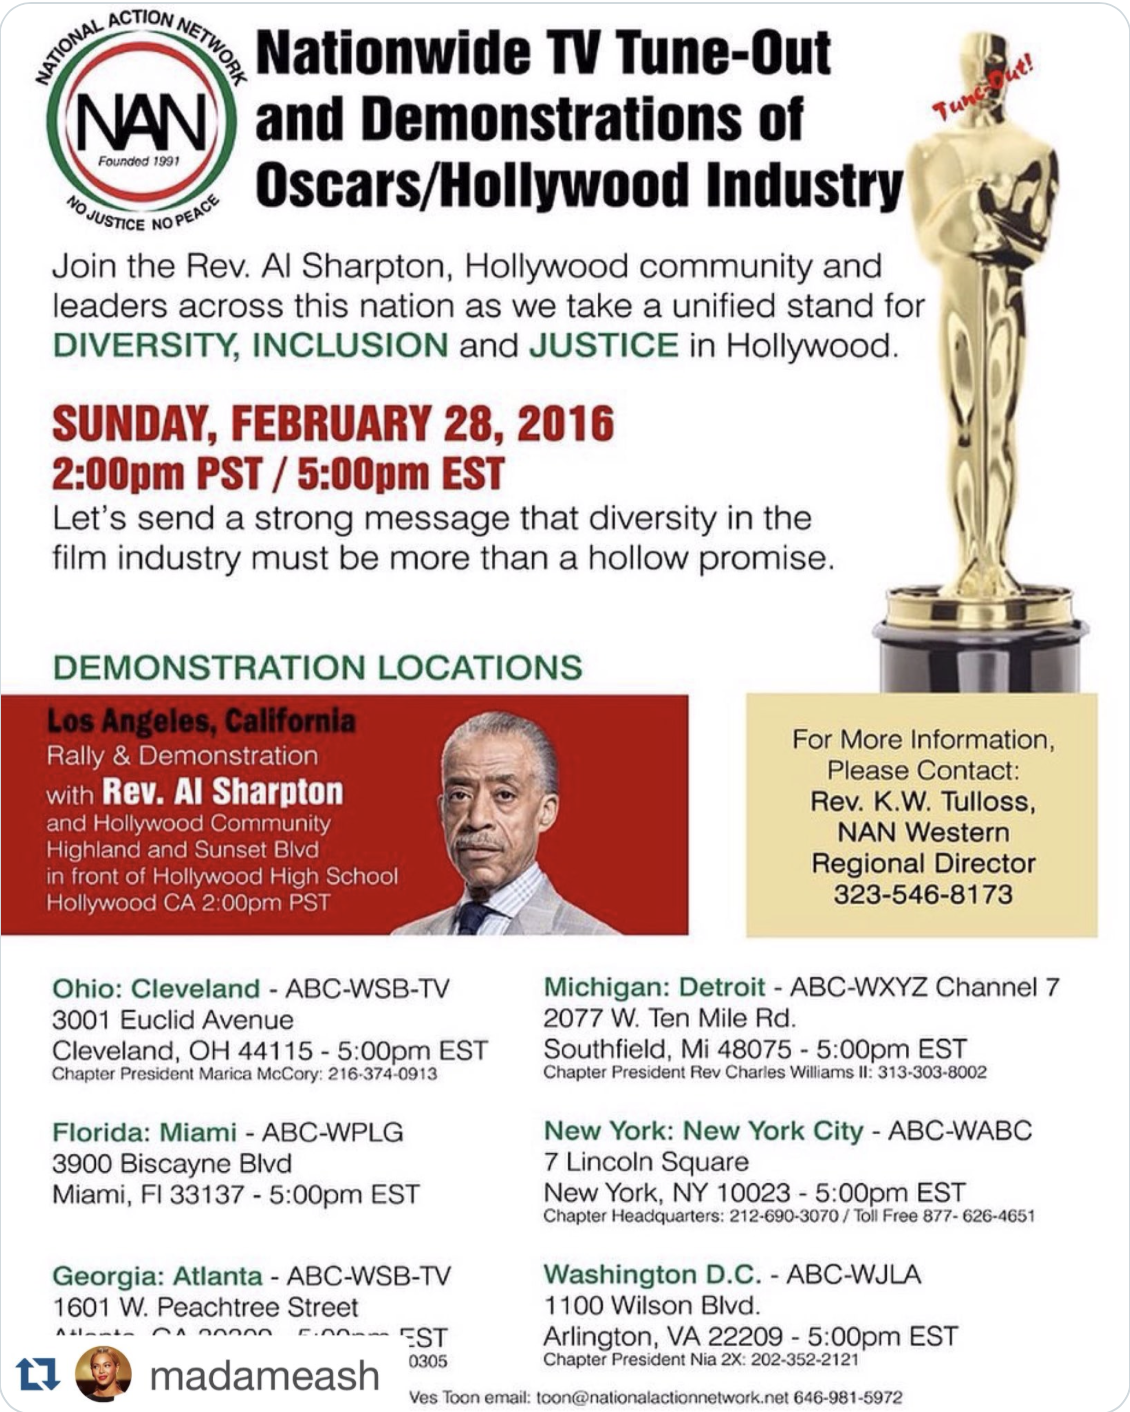 Figure 5: Boycott of the Oscars promoted by National Action Network. Credit: https://twitter.com/NationalAction/status/703583627918098432.